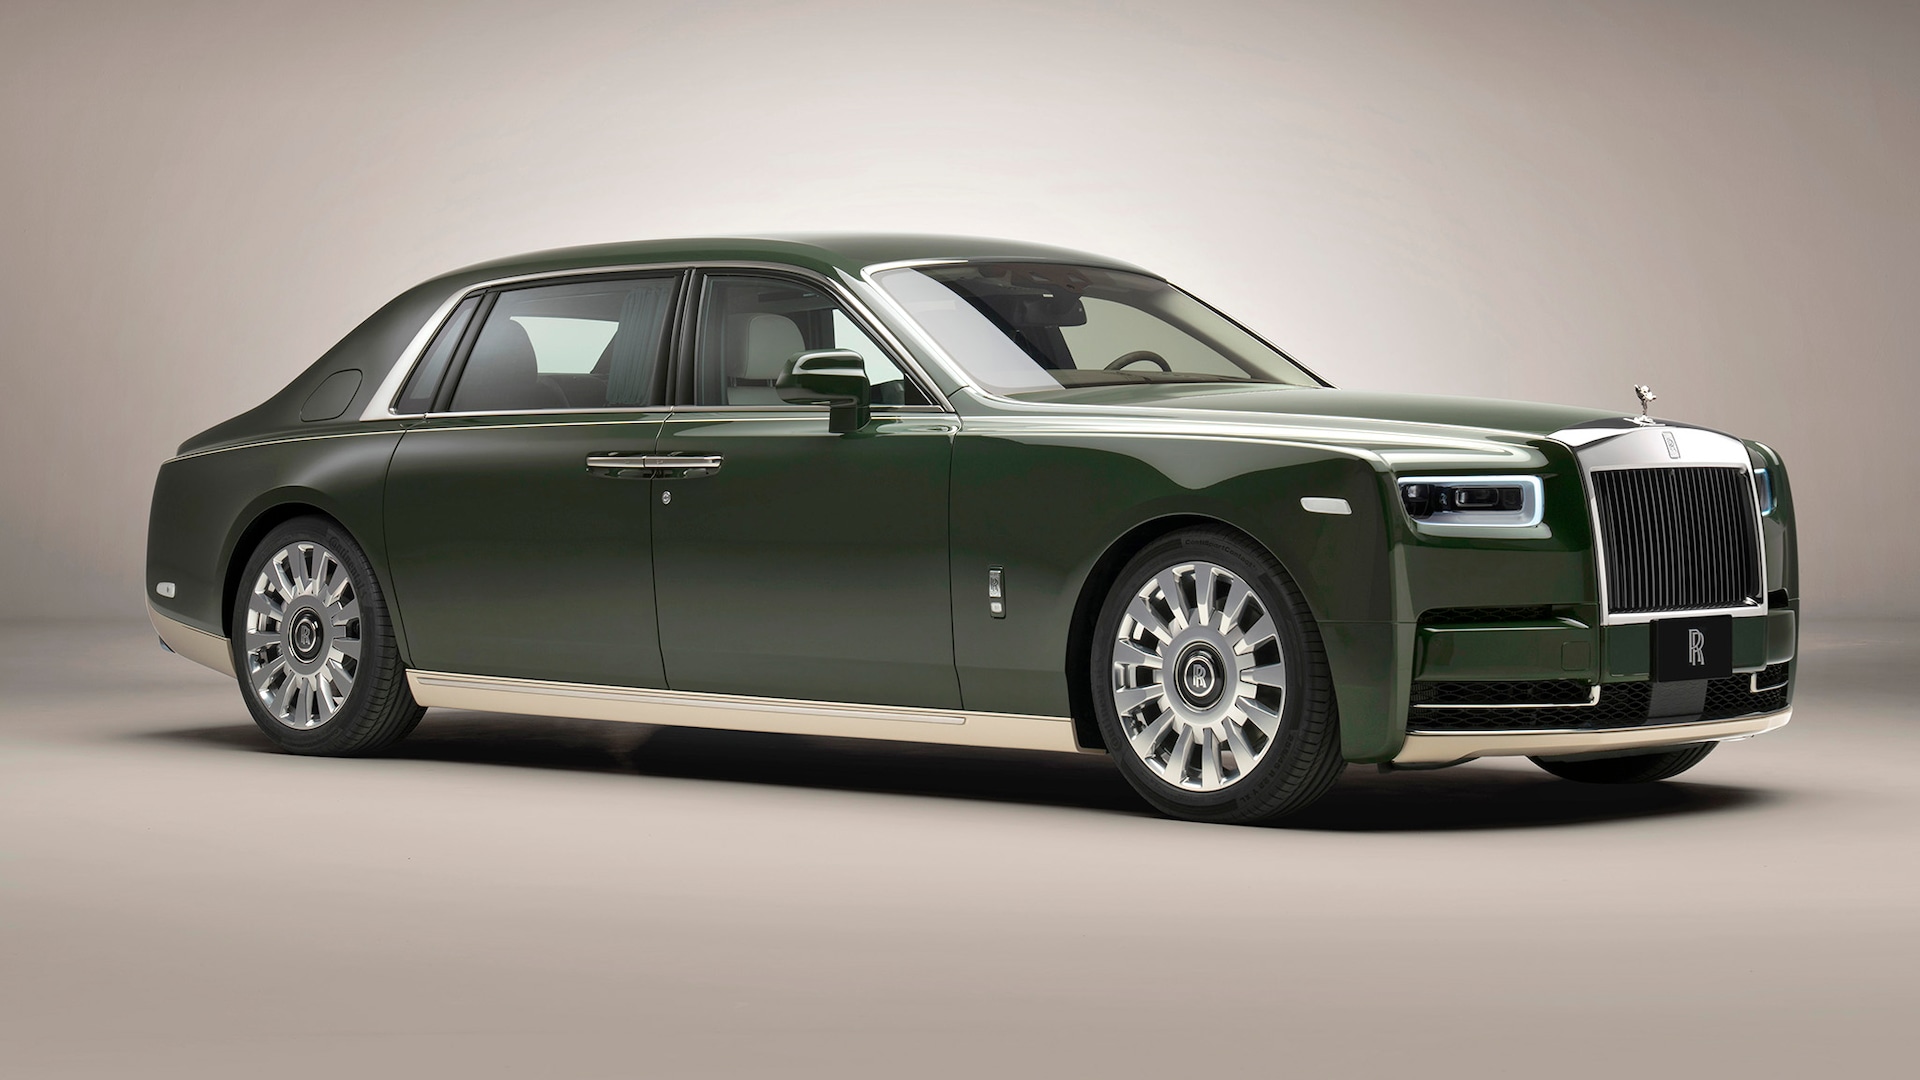 2022 Rolls-Royce Phantom Prices, Reviews, and Photos - MotorTrend